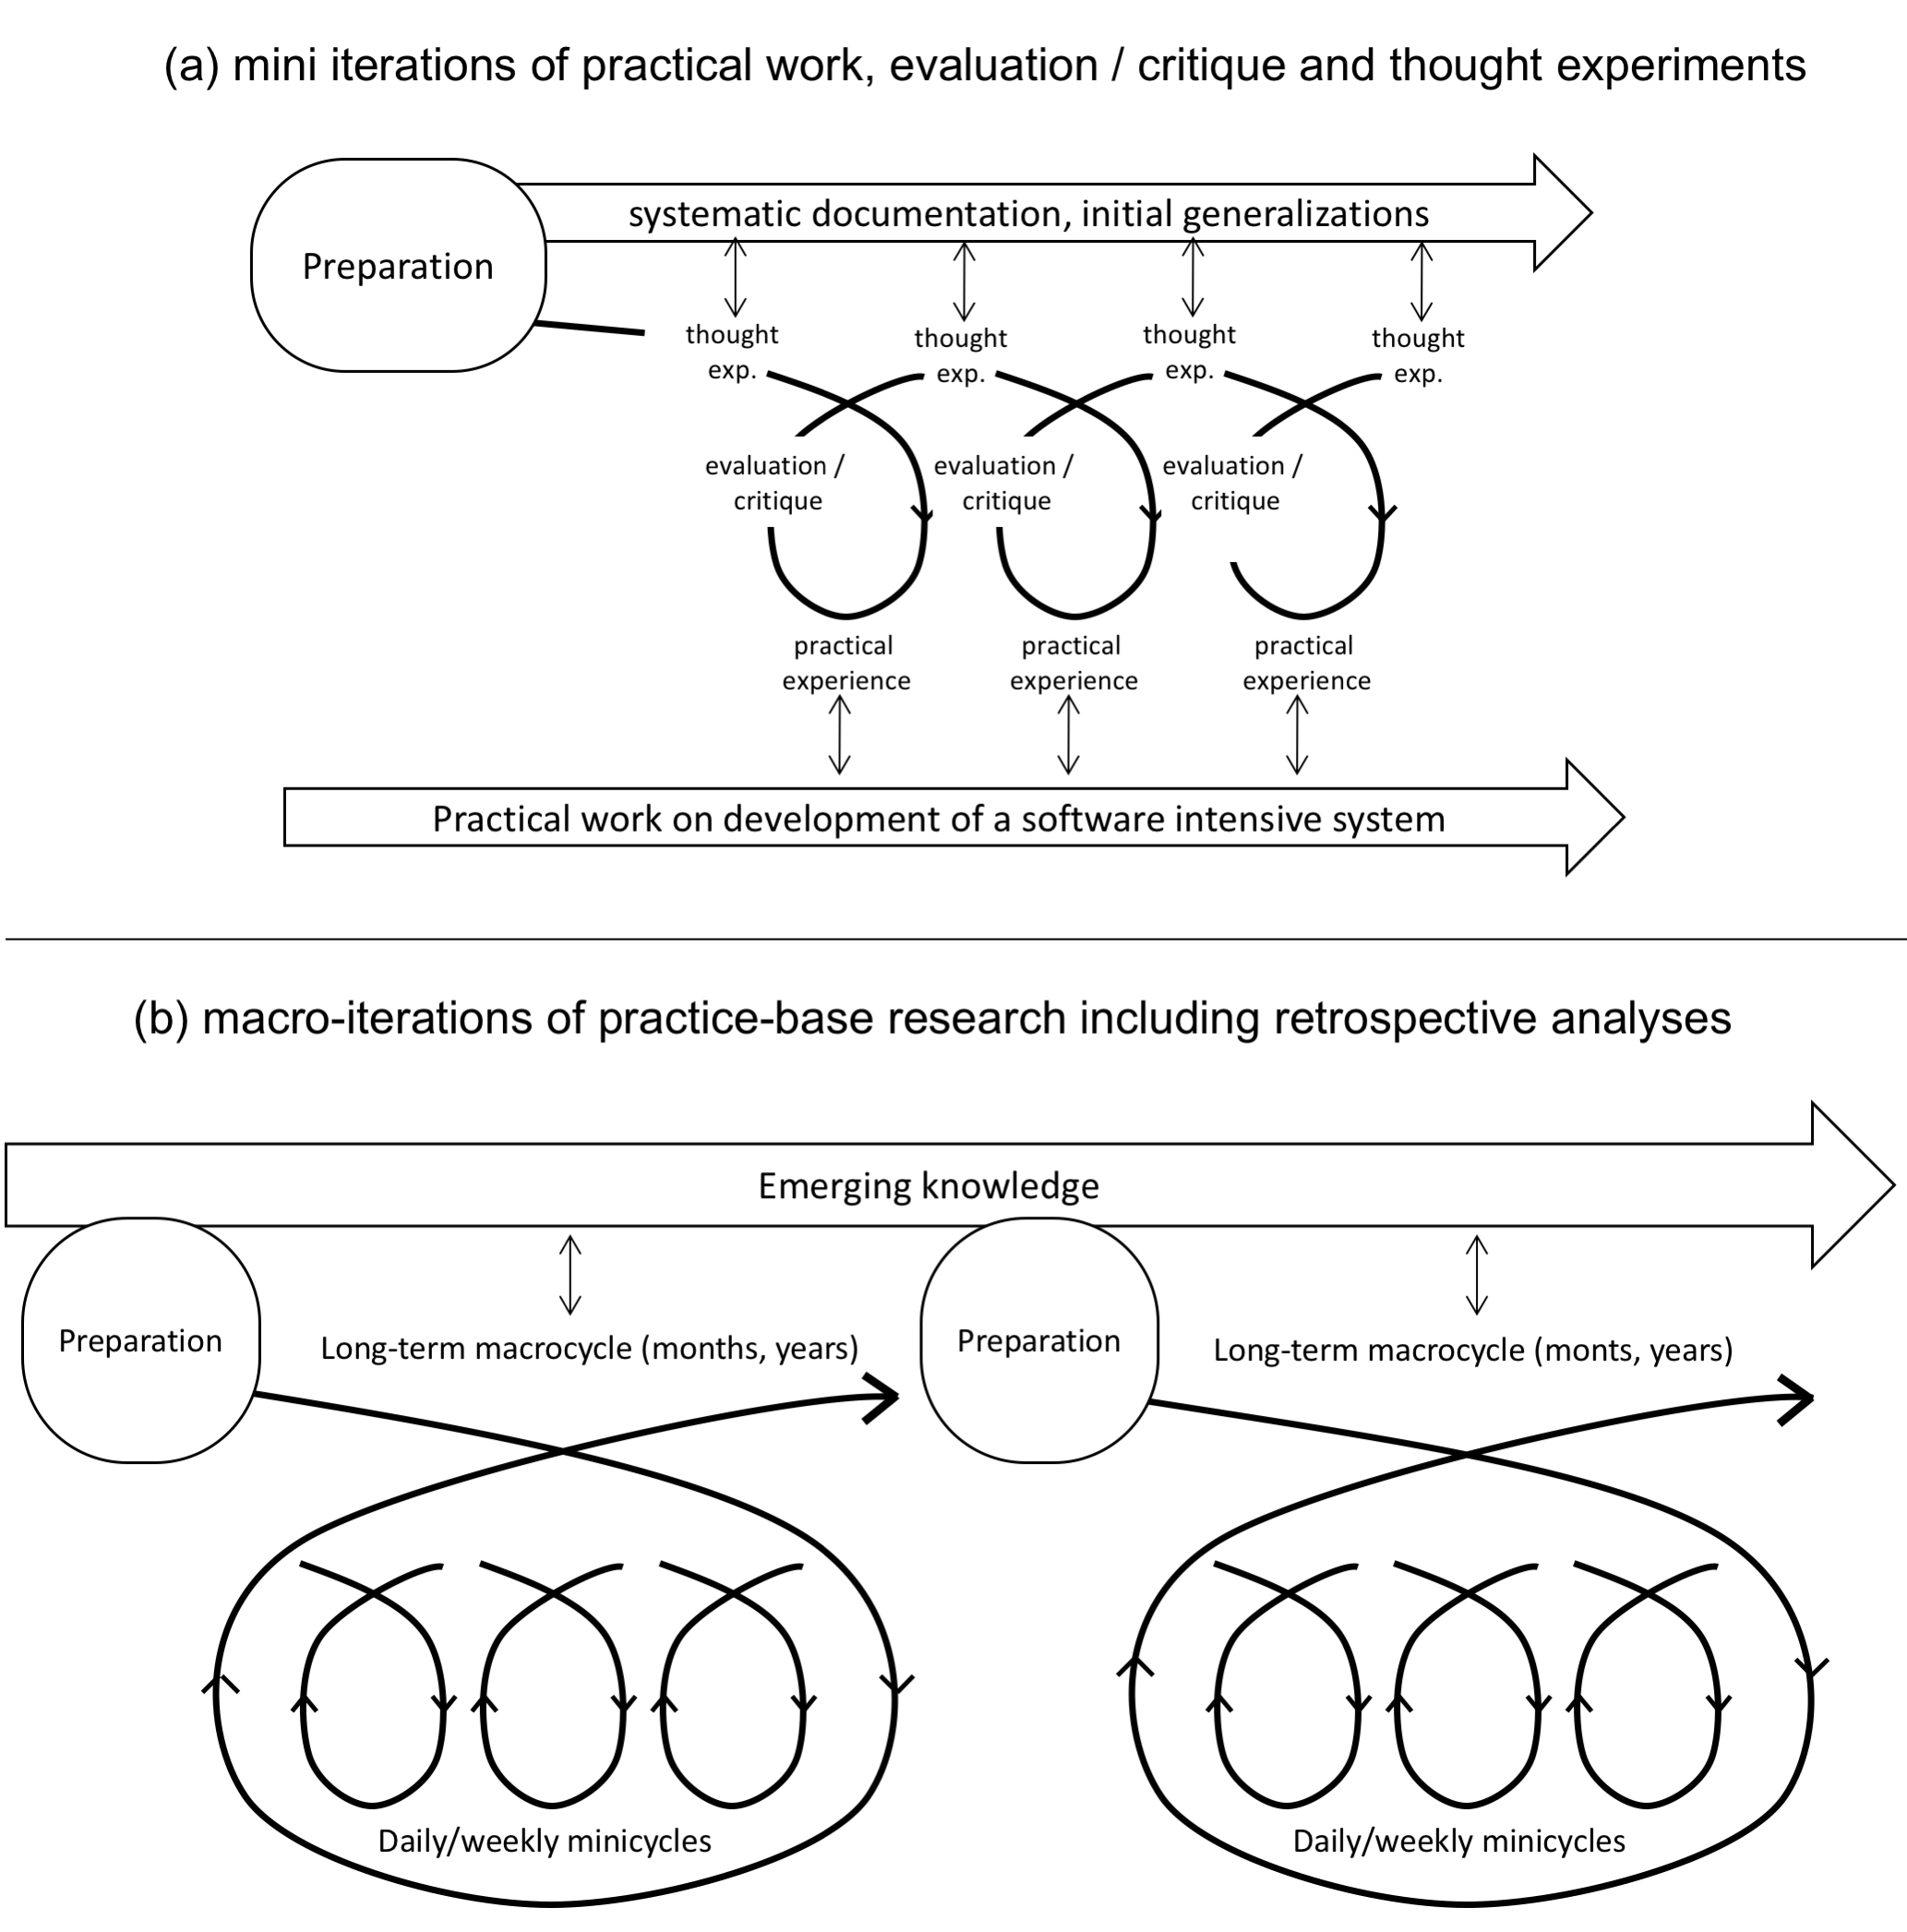 Figure 1: A simple model of iterations in practice-based research. We can view a practice-based research process as composed of mini-iterations of preparations, practical work, and evaluations, occurring continuously through the project (a), embedded in long-term macro-iterations that include research preparation and retrospective analyses and reflections (b), covering the period of one or more projects. Macro-iterations can itself be connected so that results of one research project guide preparations of another research project.